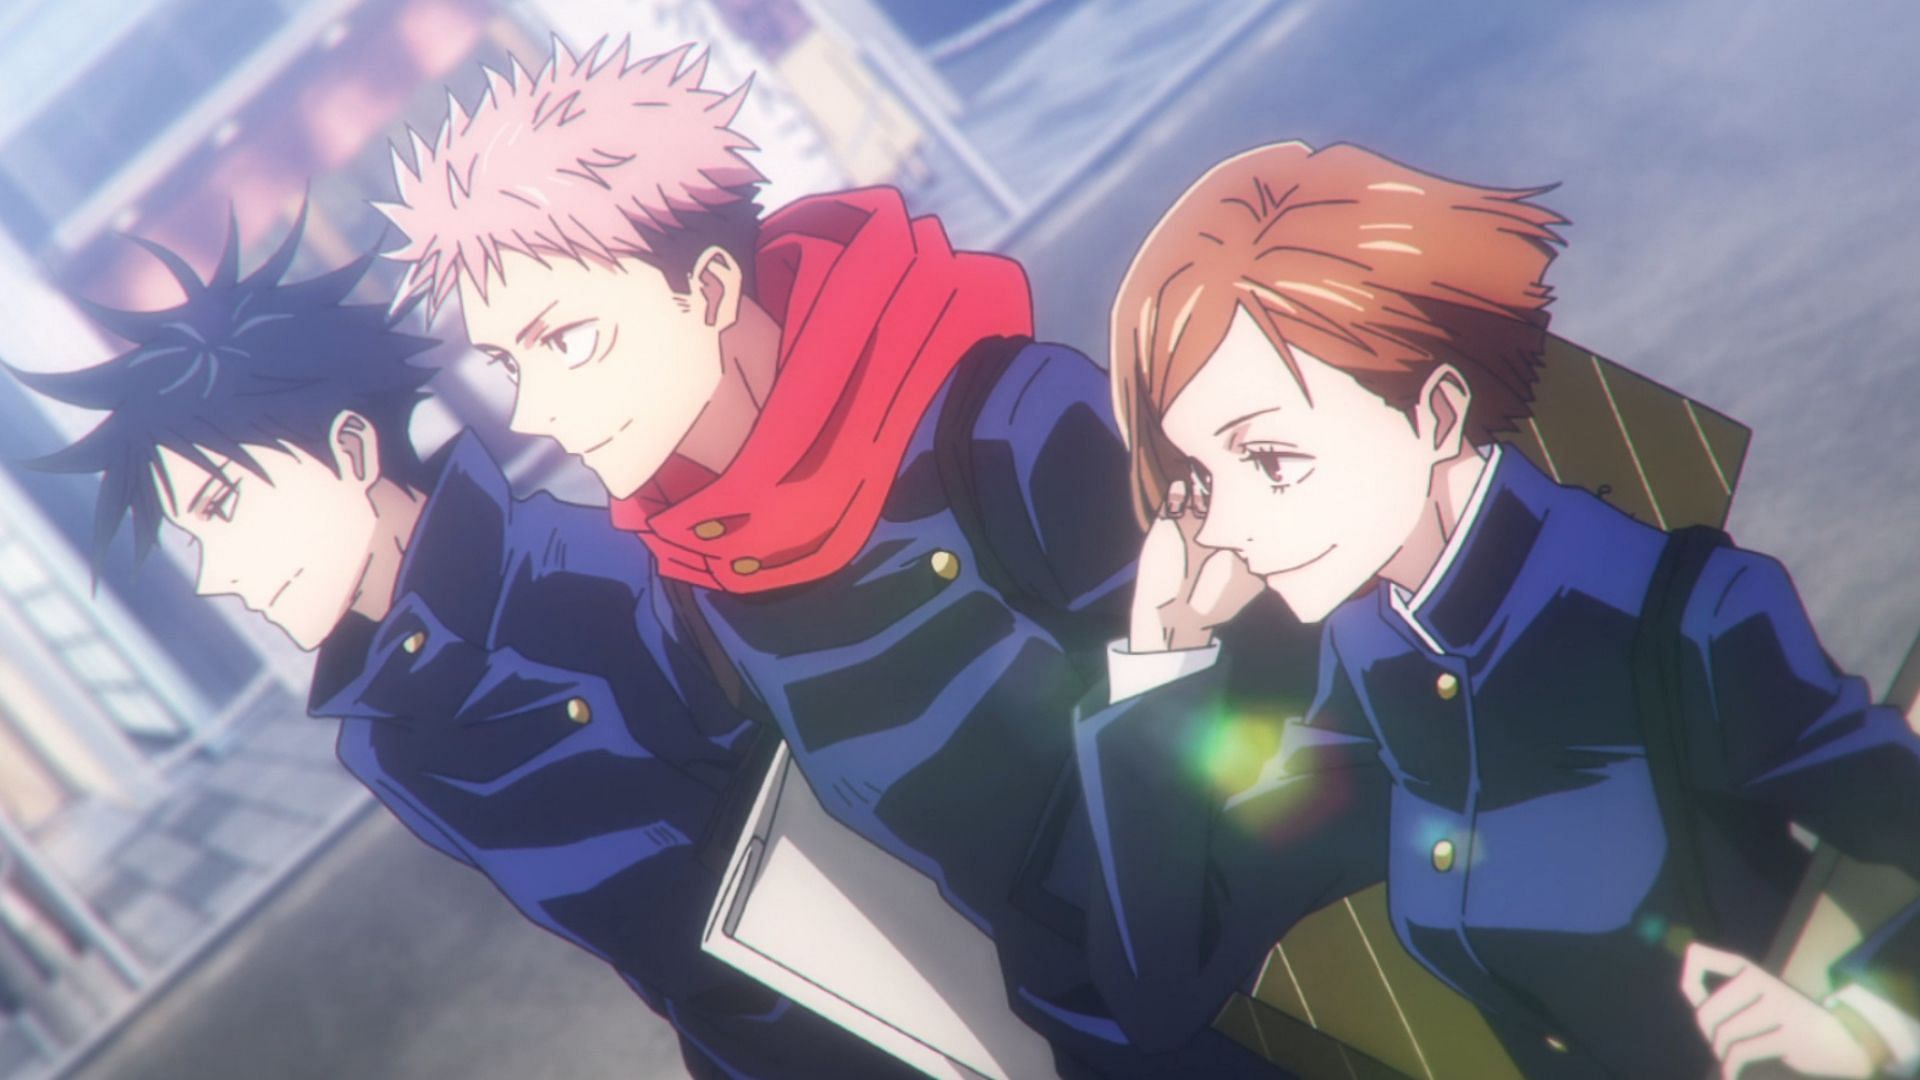 Jujutsu Kaisen 0 and More Coming to Crunchyroll in September